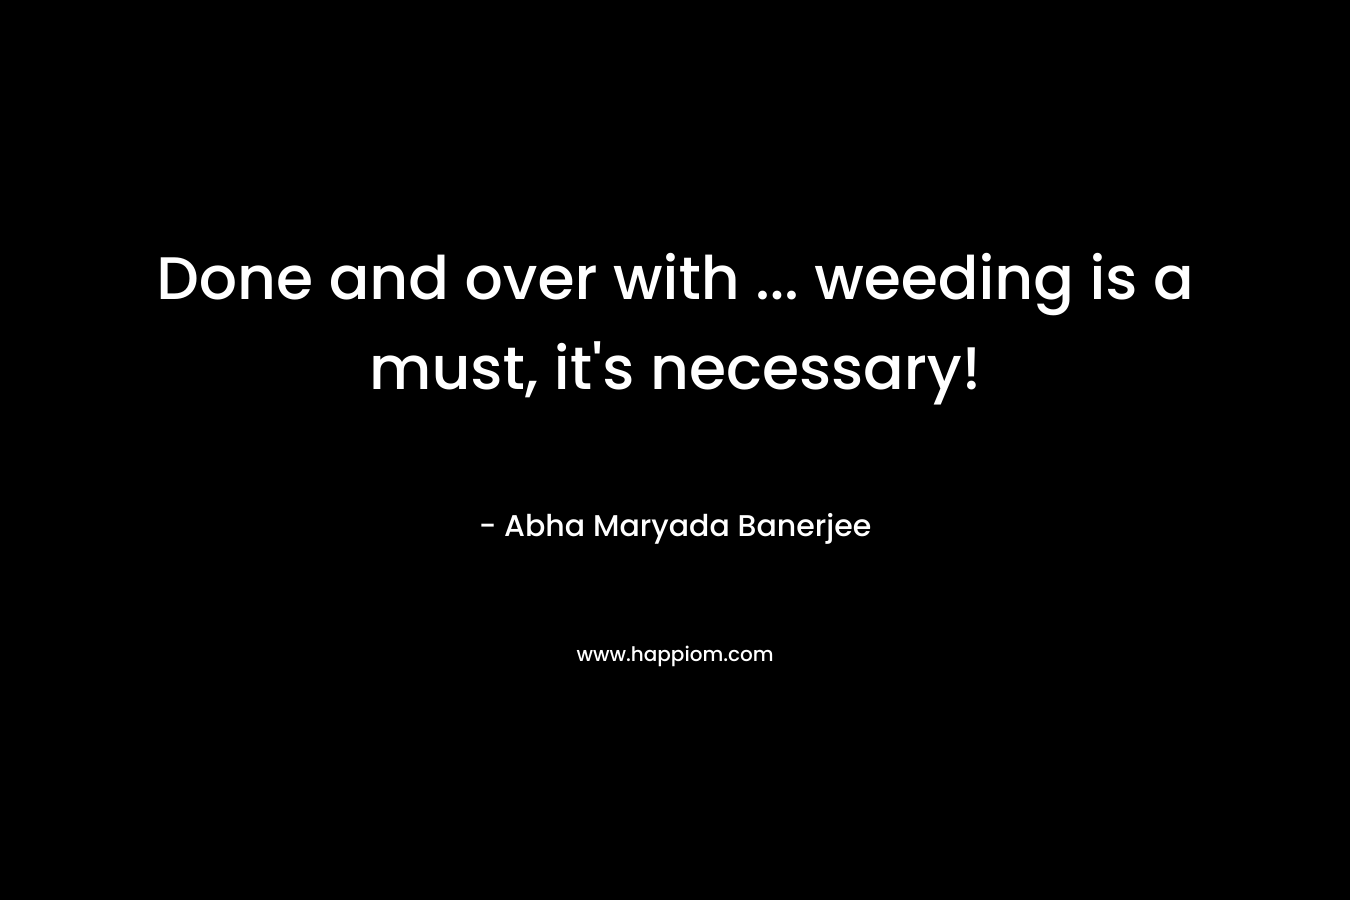 Done and over with … weeding is a must, it’s necessary! – Abha Maryada Banerjee